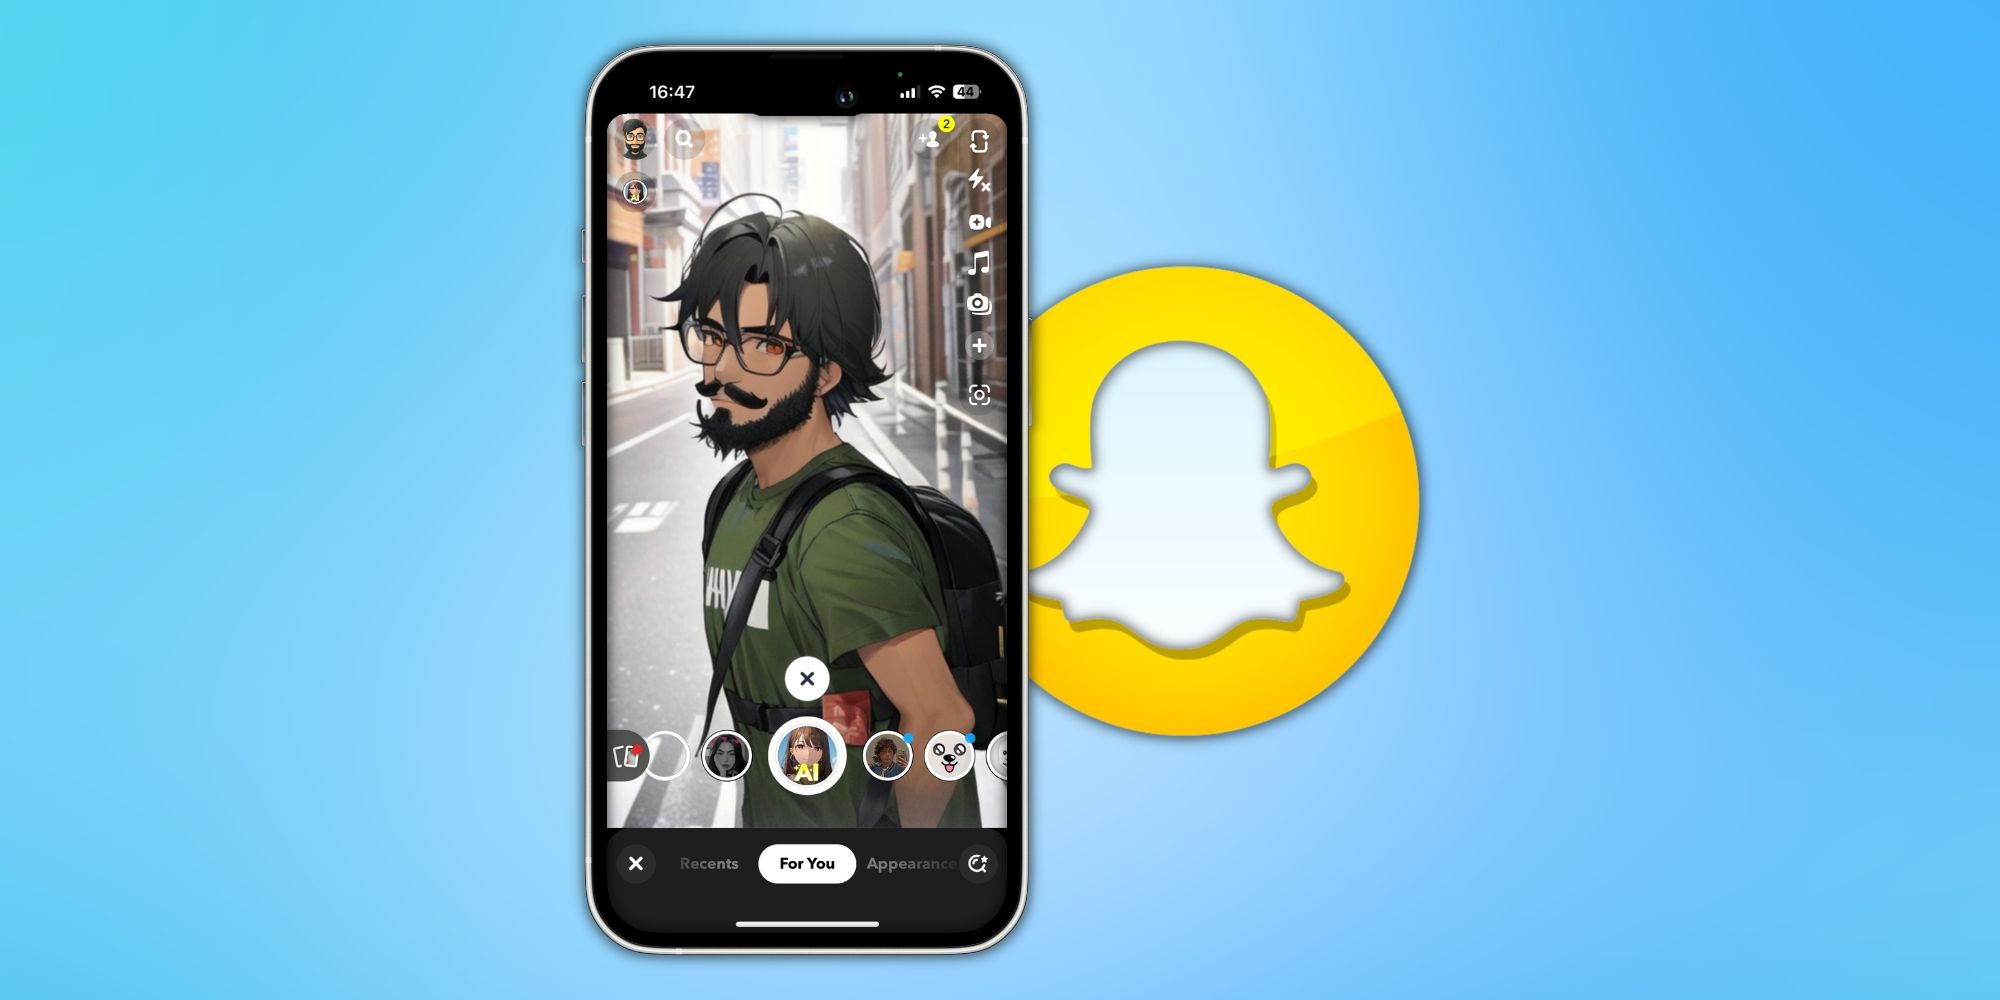 Snapchat's new update bring AR-style 'World Lenses': Here's how to use